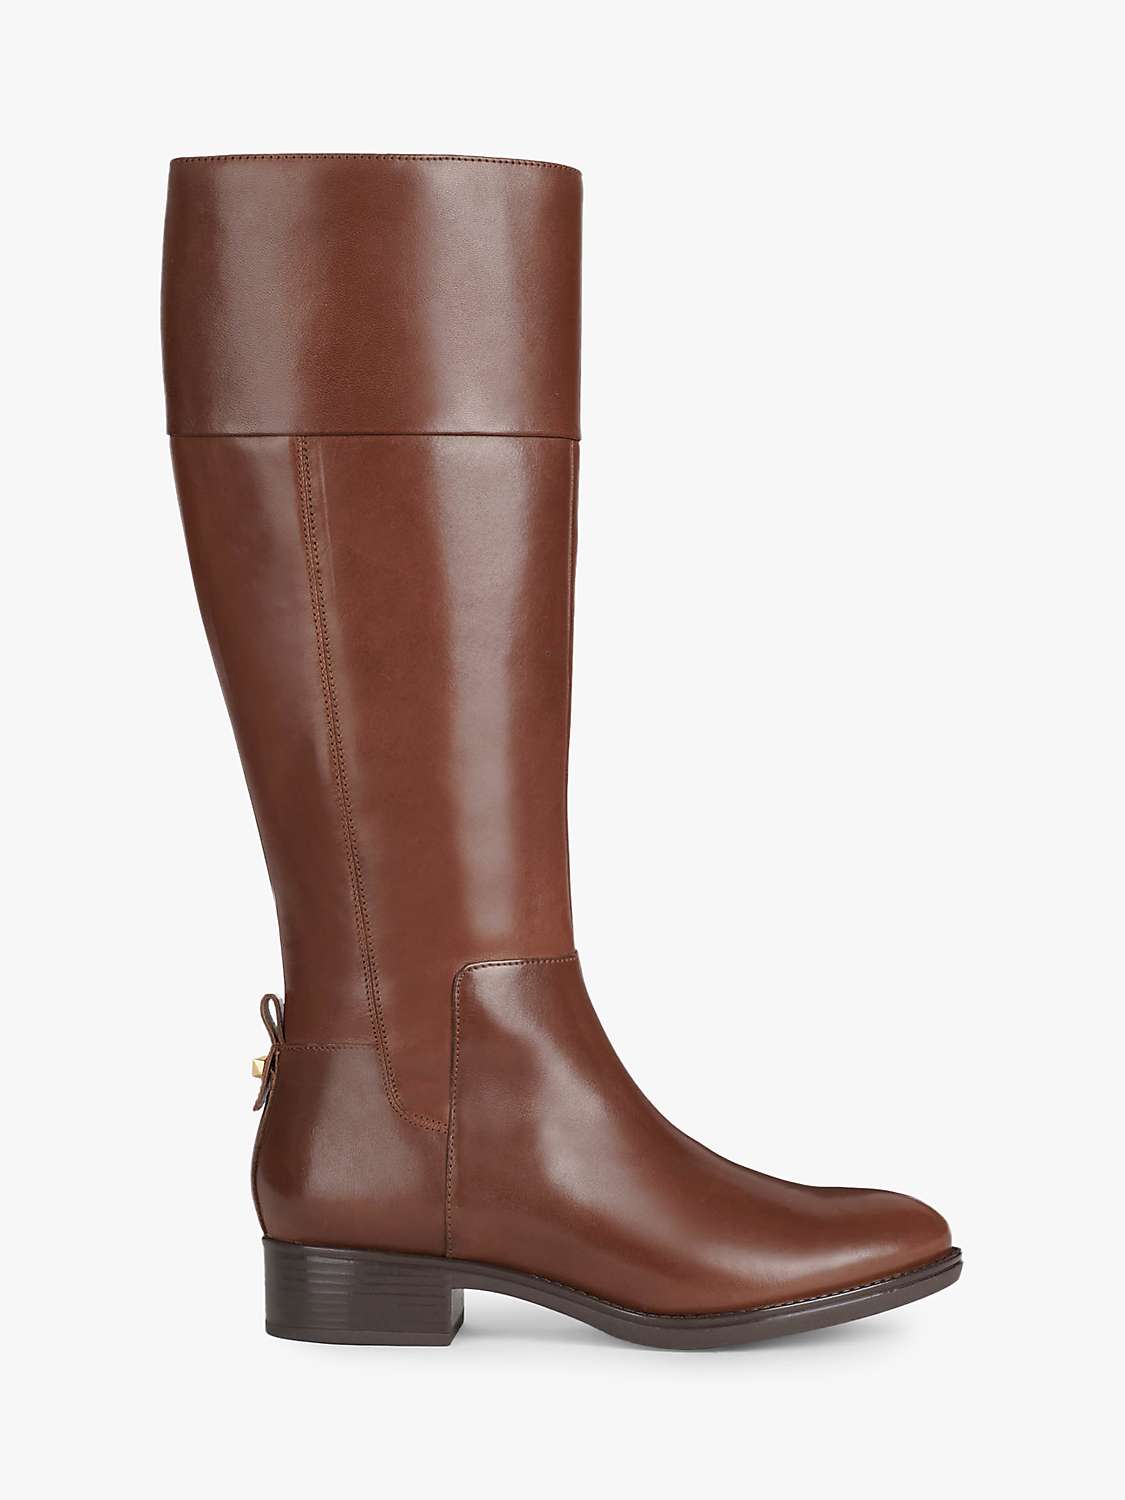 insondable techo Íncubo Geox Women's Felicity Leather Block Heel Knee High Boots, Brown at John  Lewis & Partners